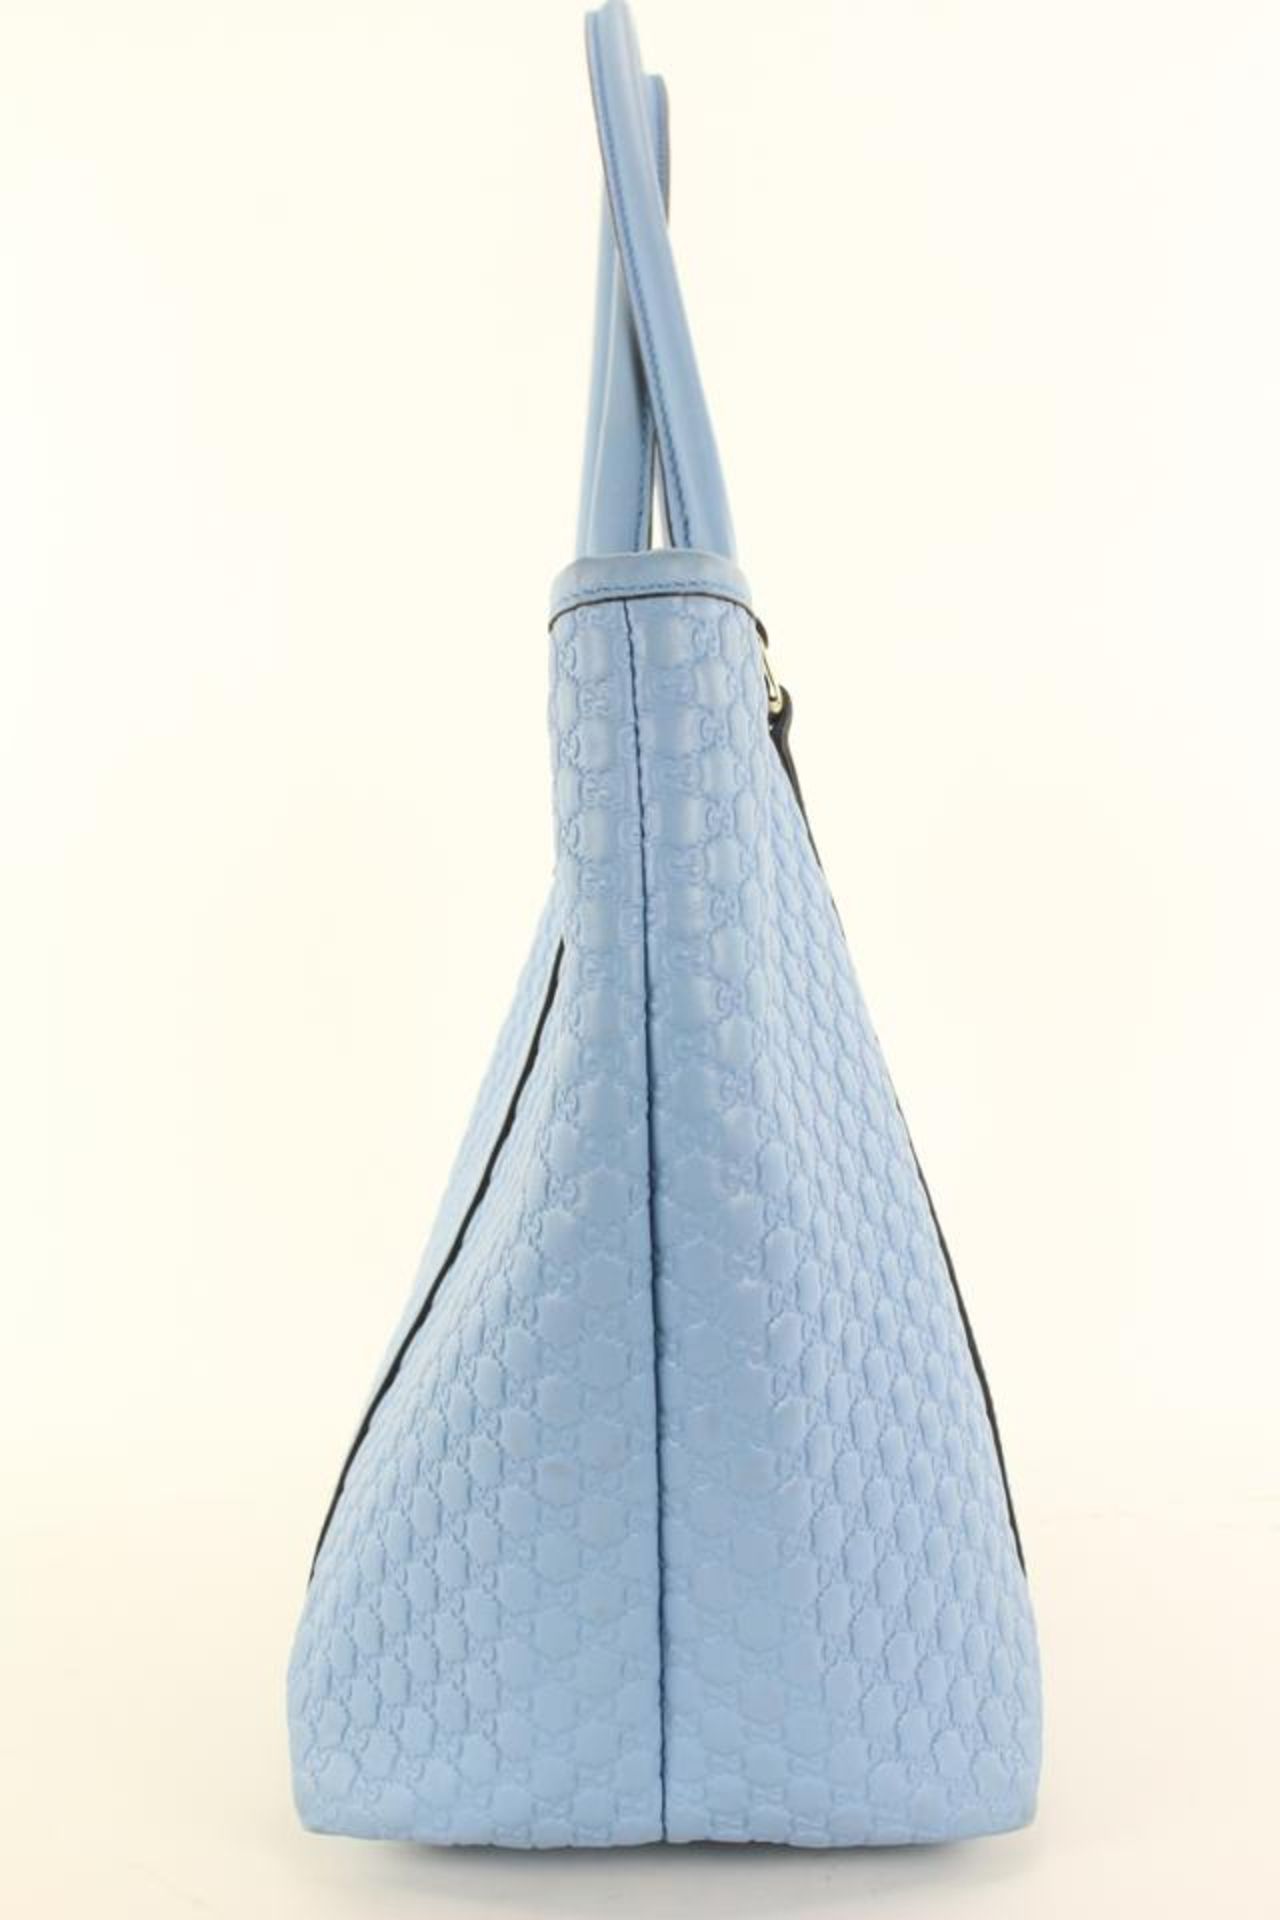 GUCCI LIGHT BLUE LEATHER MICROGUCCISSIMA LARGE JOY TOTE - Image 5 of 12